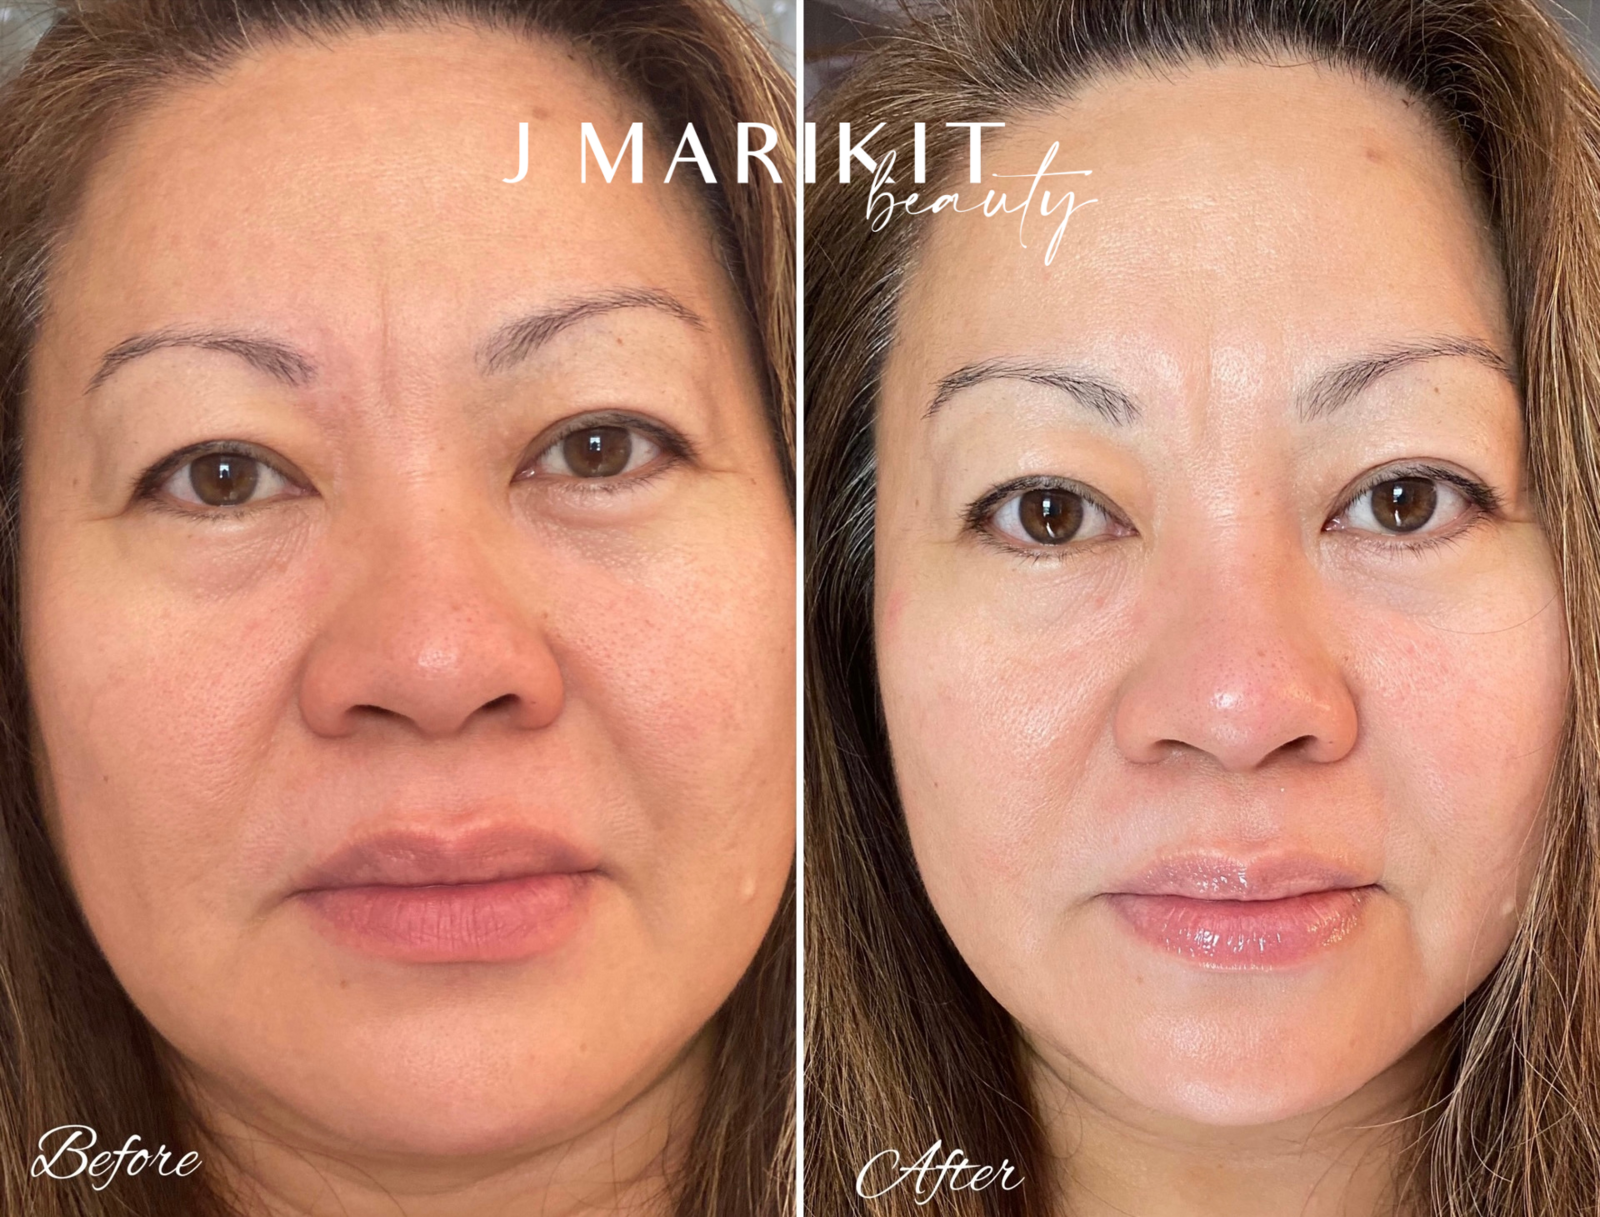 Beauty services such as micro-dermabrasion helped this client have radiant, smooth skin.